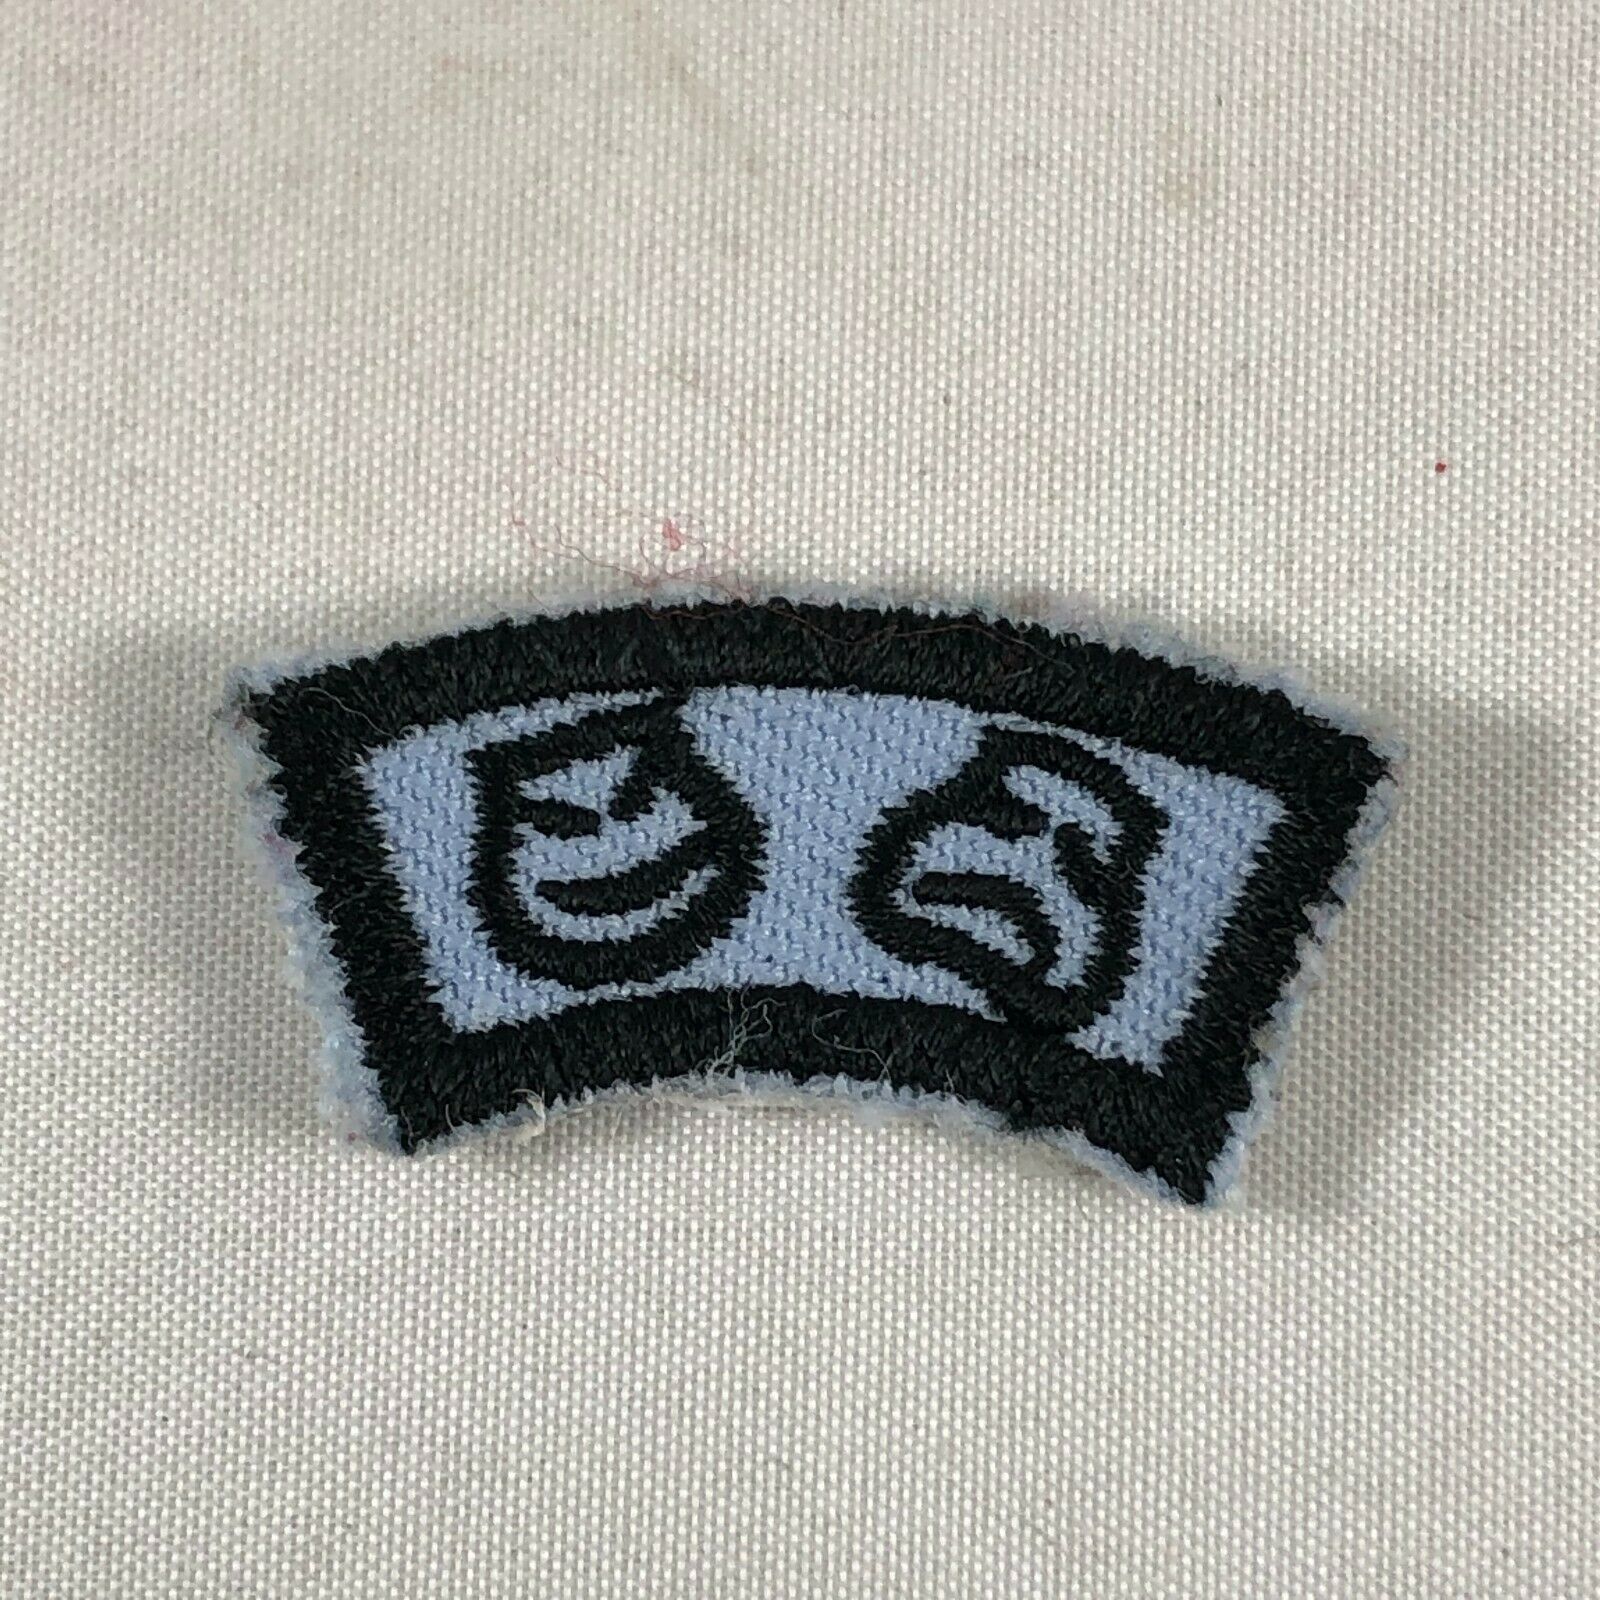 Primary image for New Vintage Boy Scouts BSA Segment Patch - Blue Drama - Happy Sad Mask Comedy